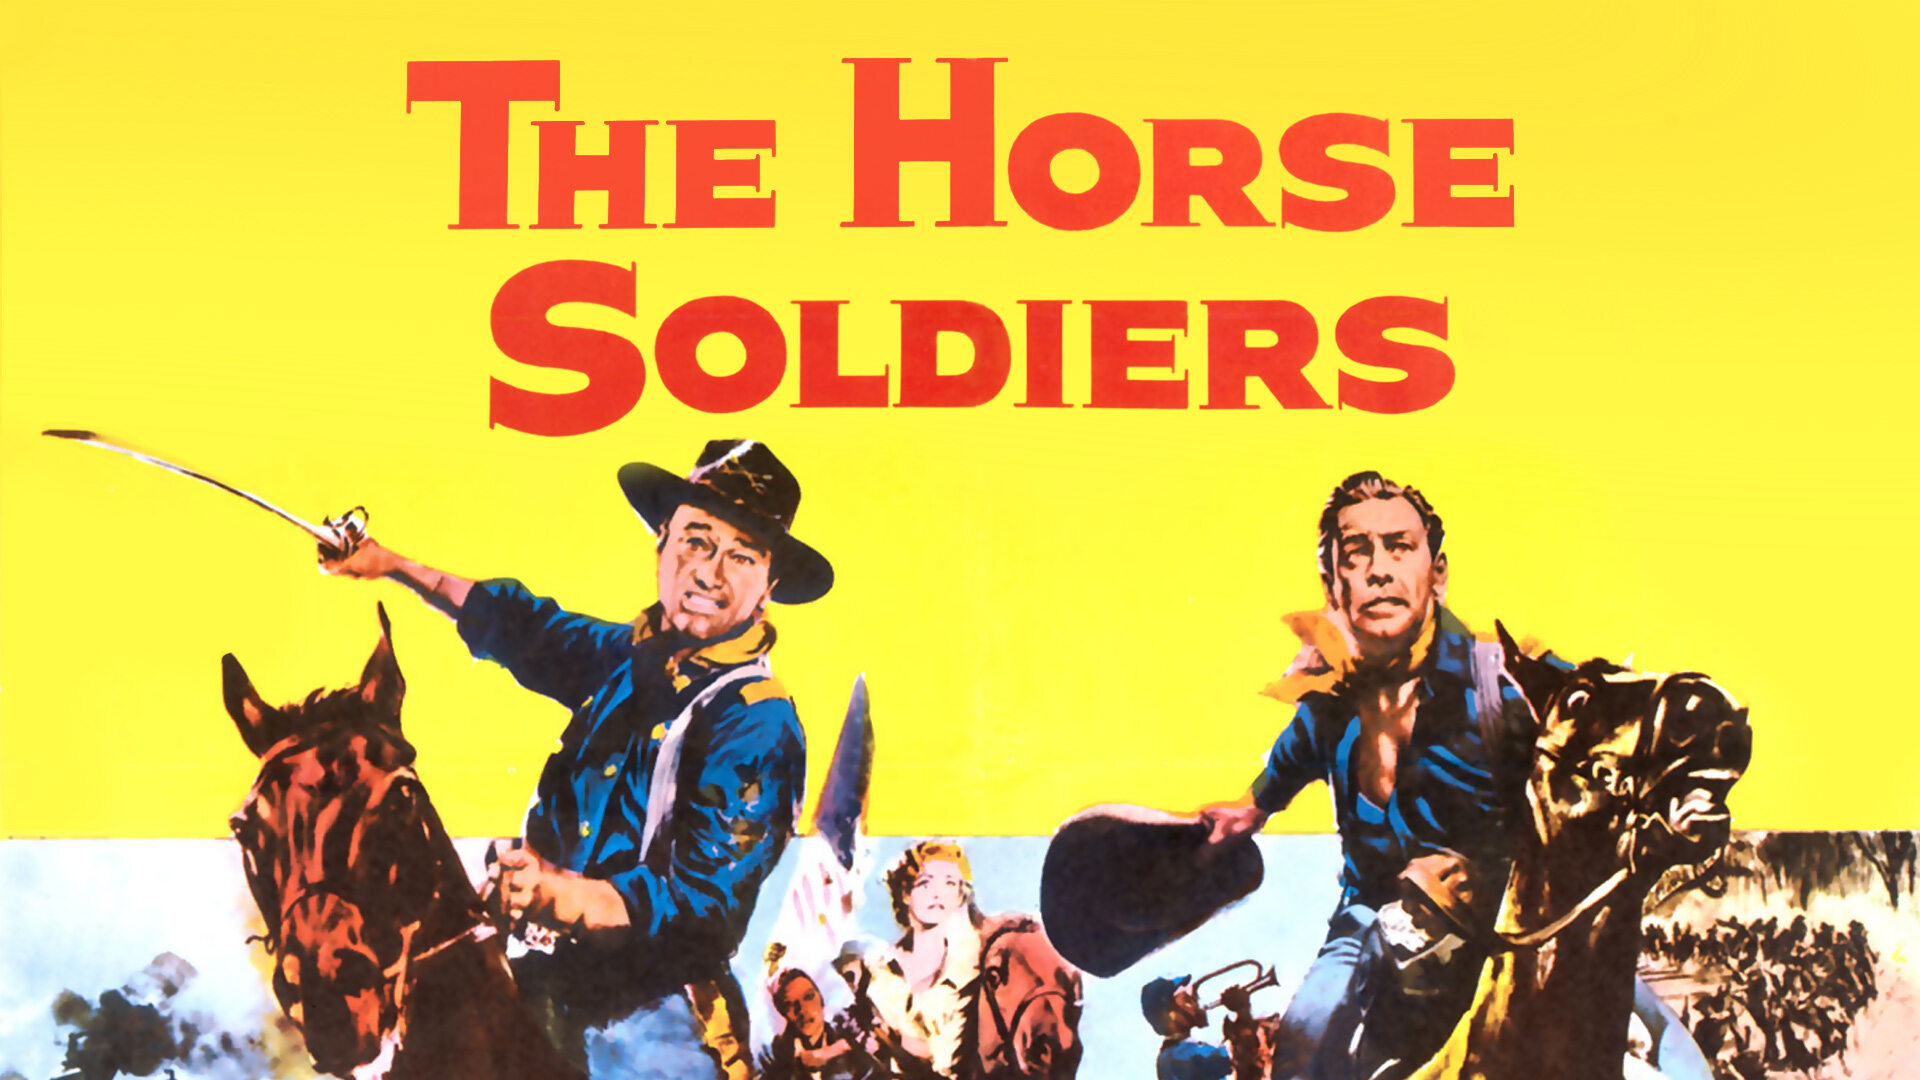 50 Facts about the movie The Horse Soldiers - Facts.net